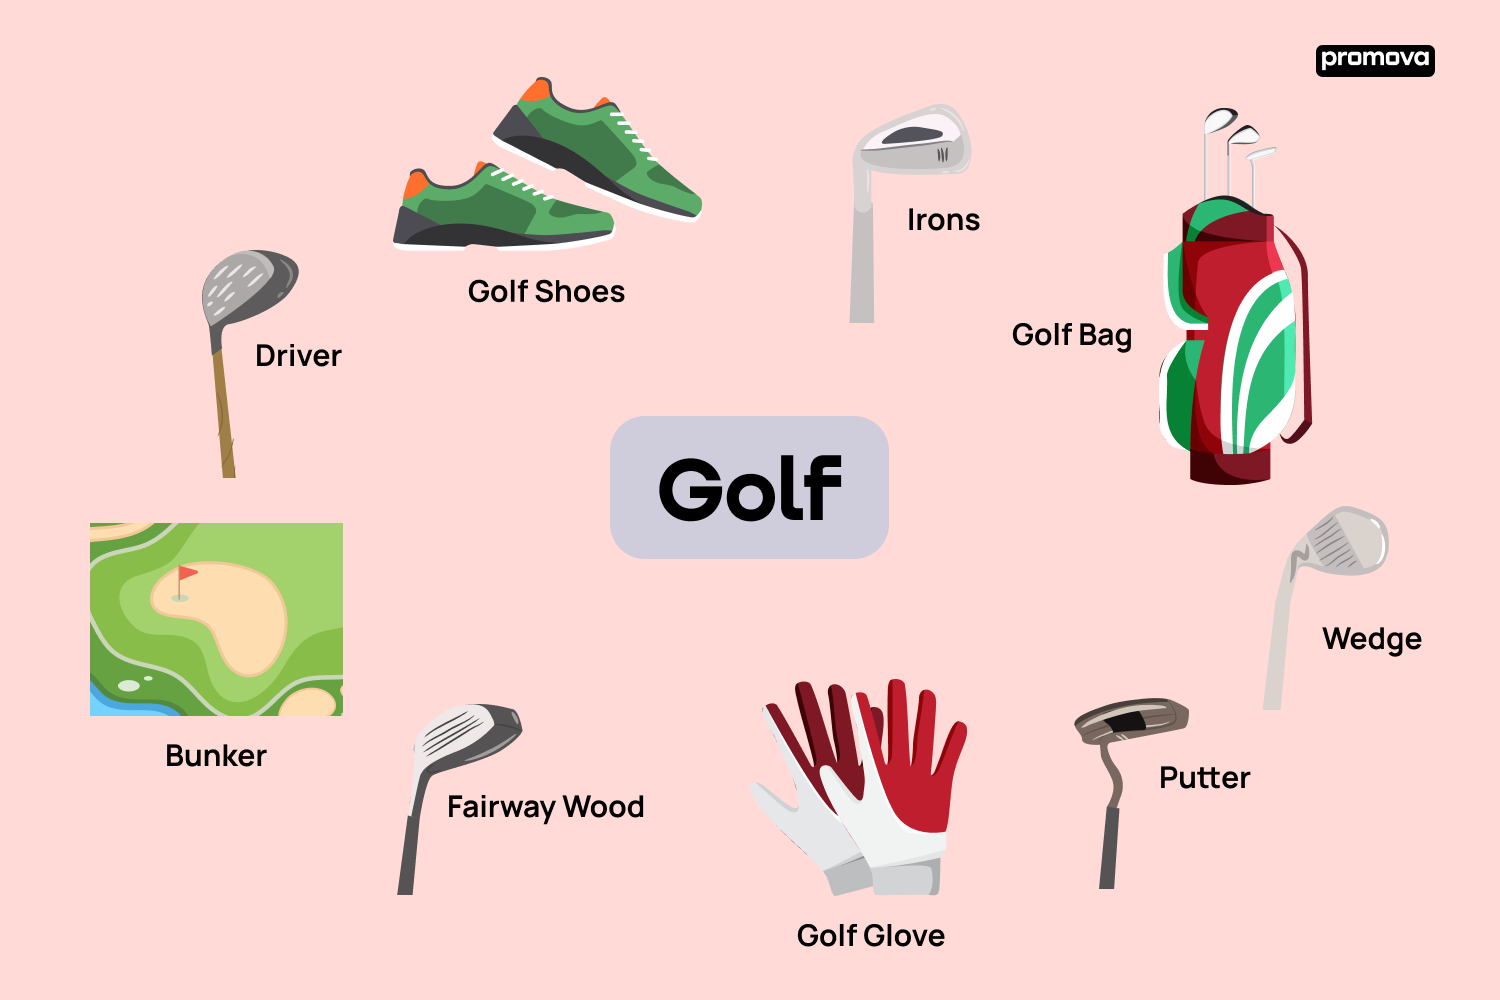 Dynamic Golf Shot Names: From Drives to Pitches that Impress